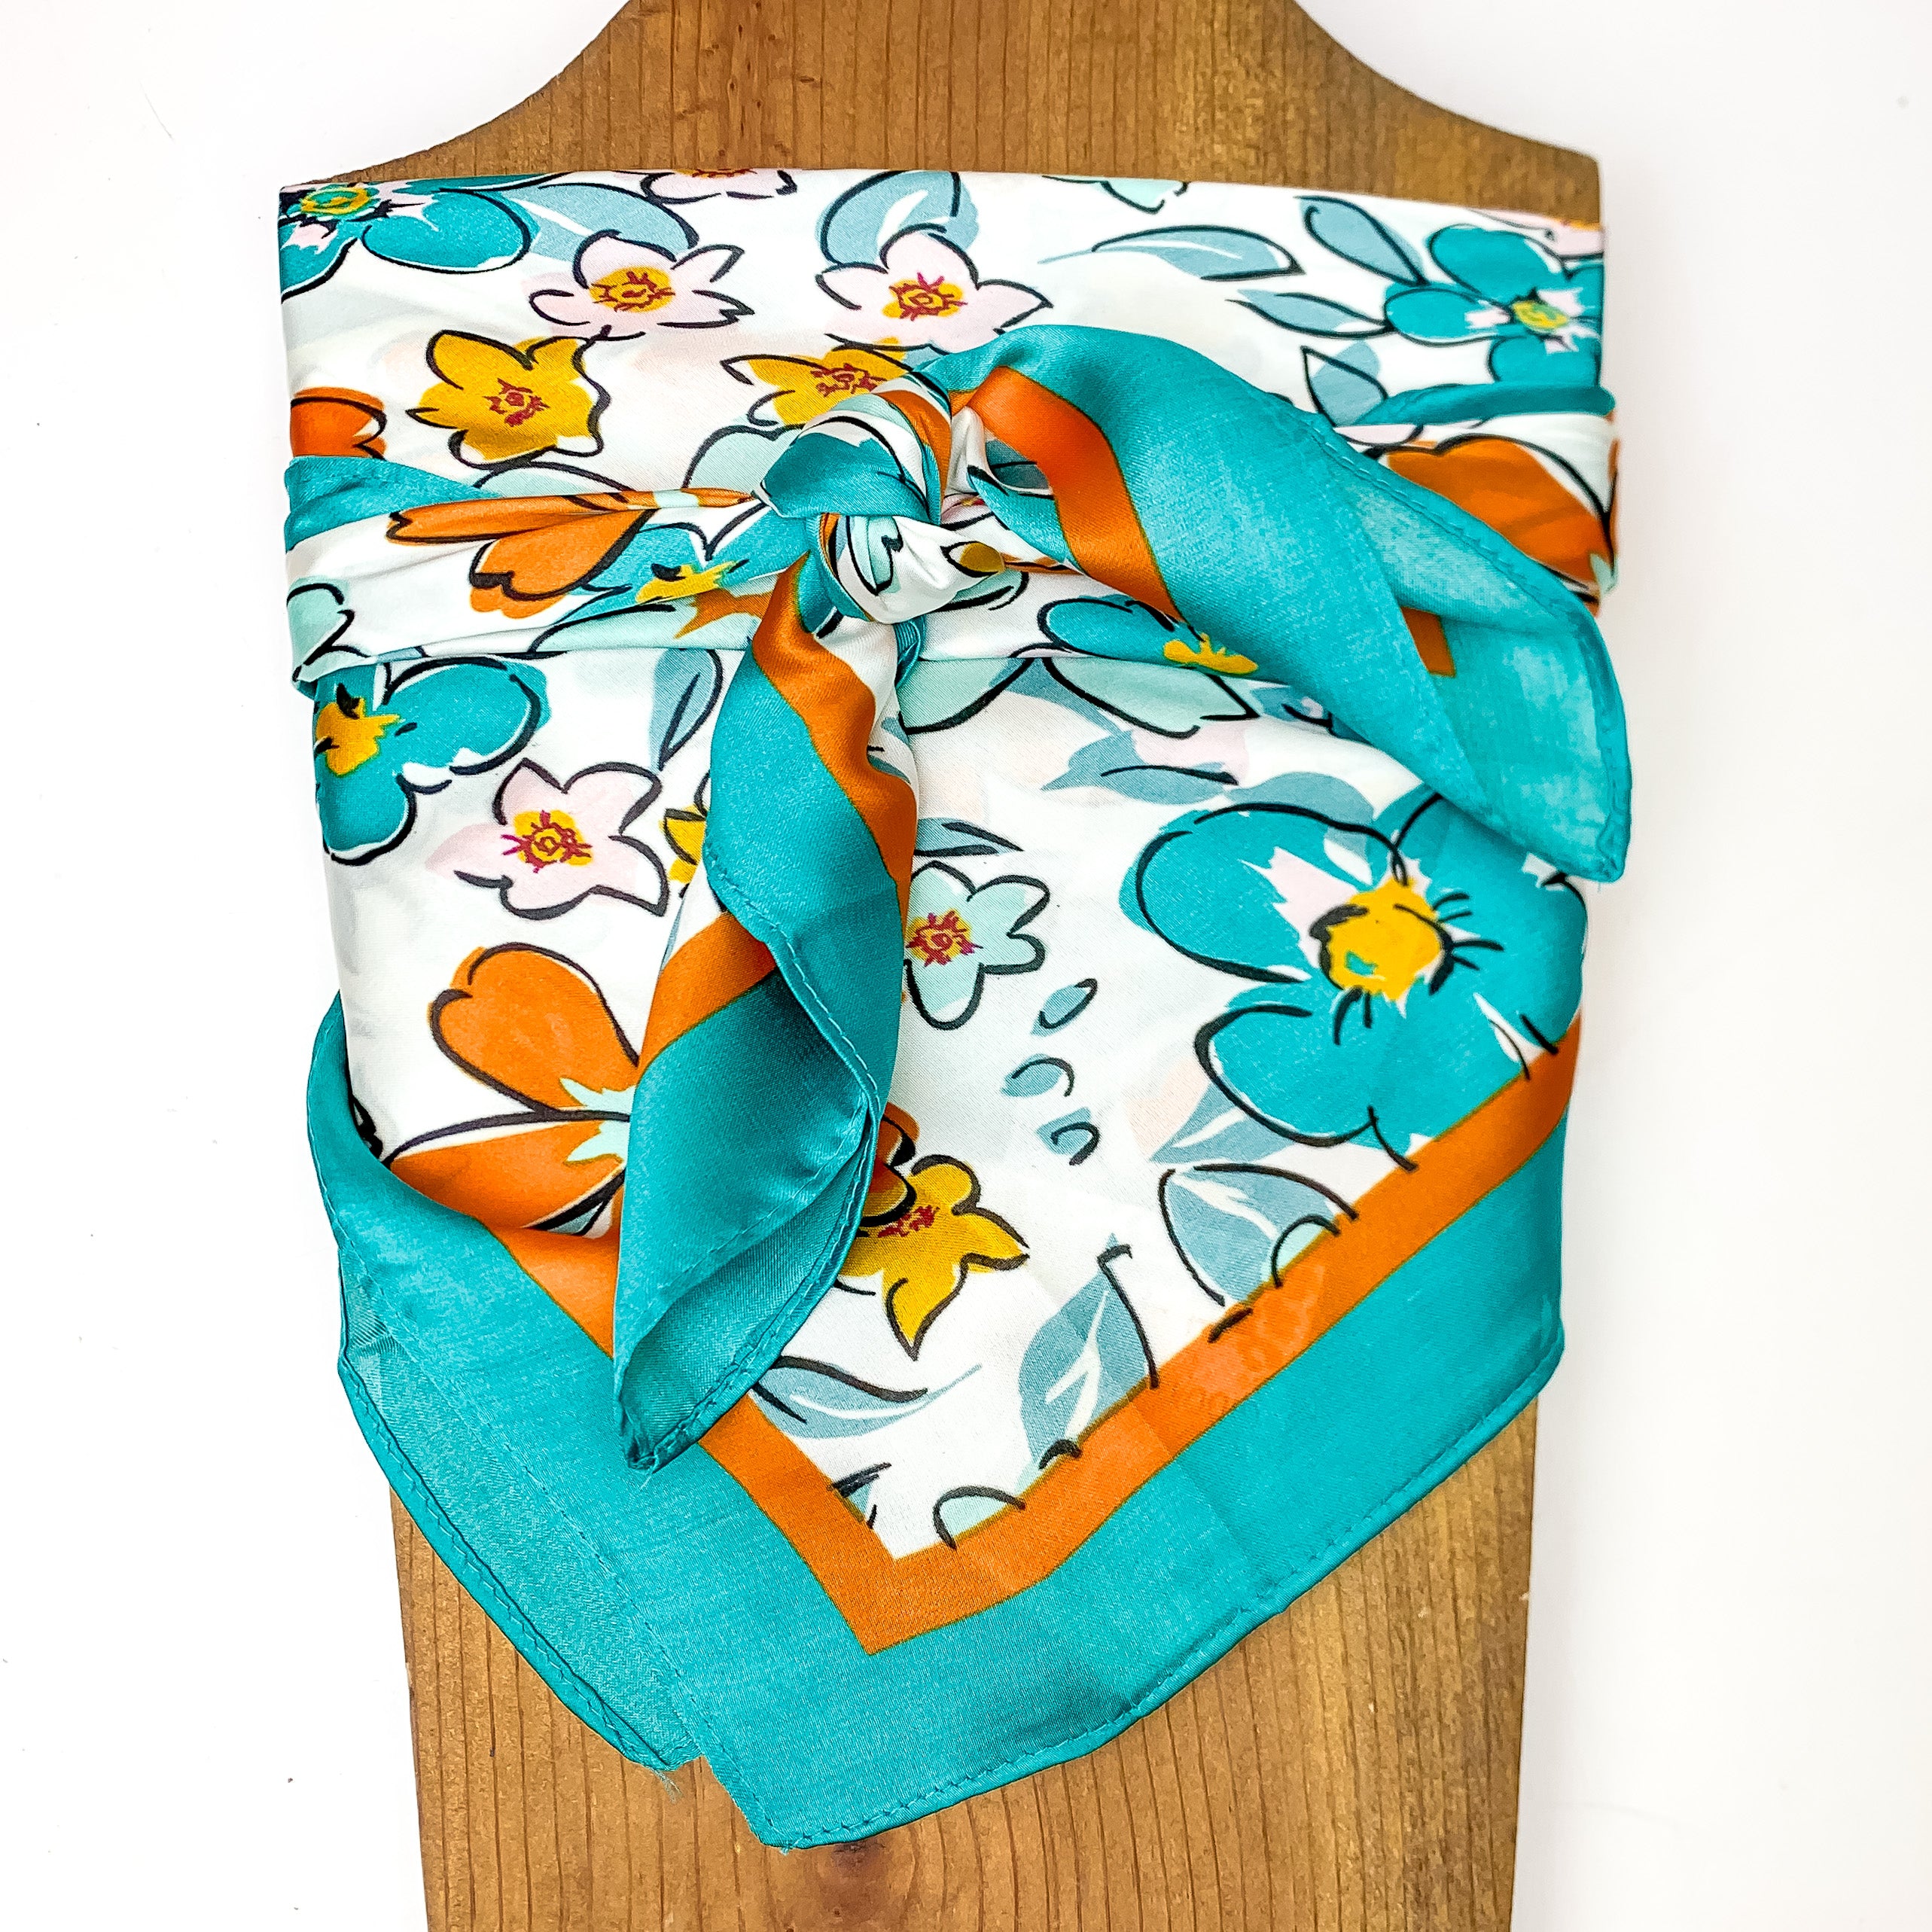 Flower Print Wild Rag in Teal Blue. This scarf is pictured tied around a wood piece with a white background.